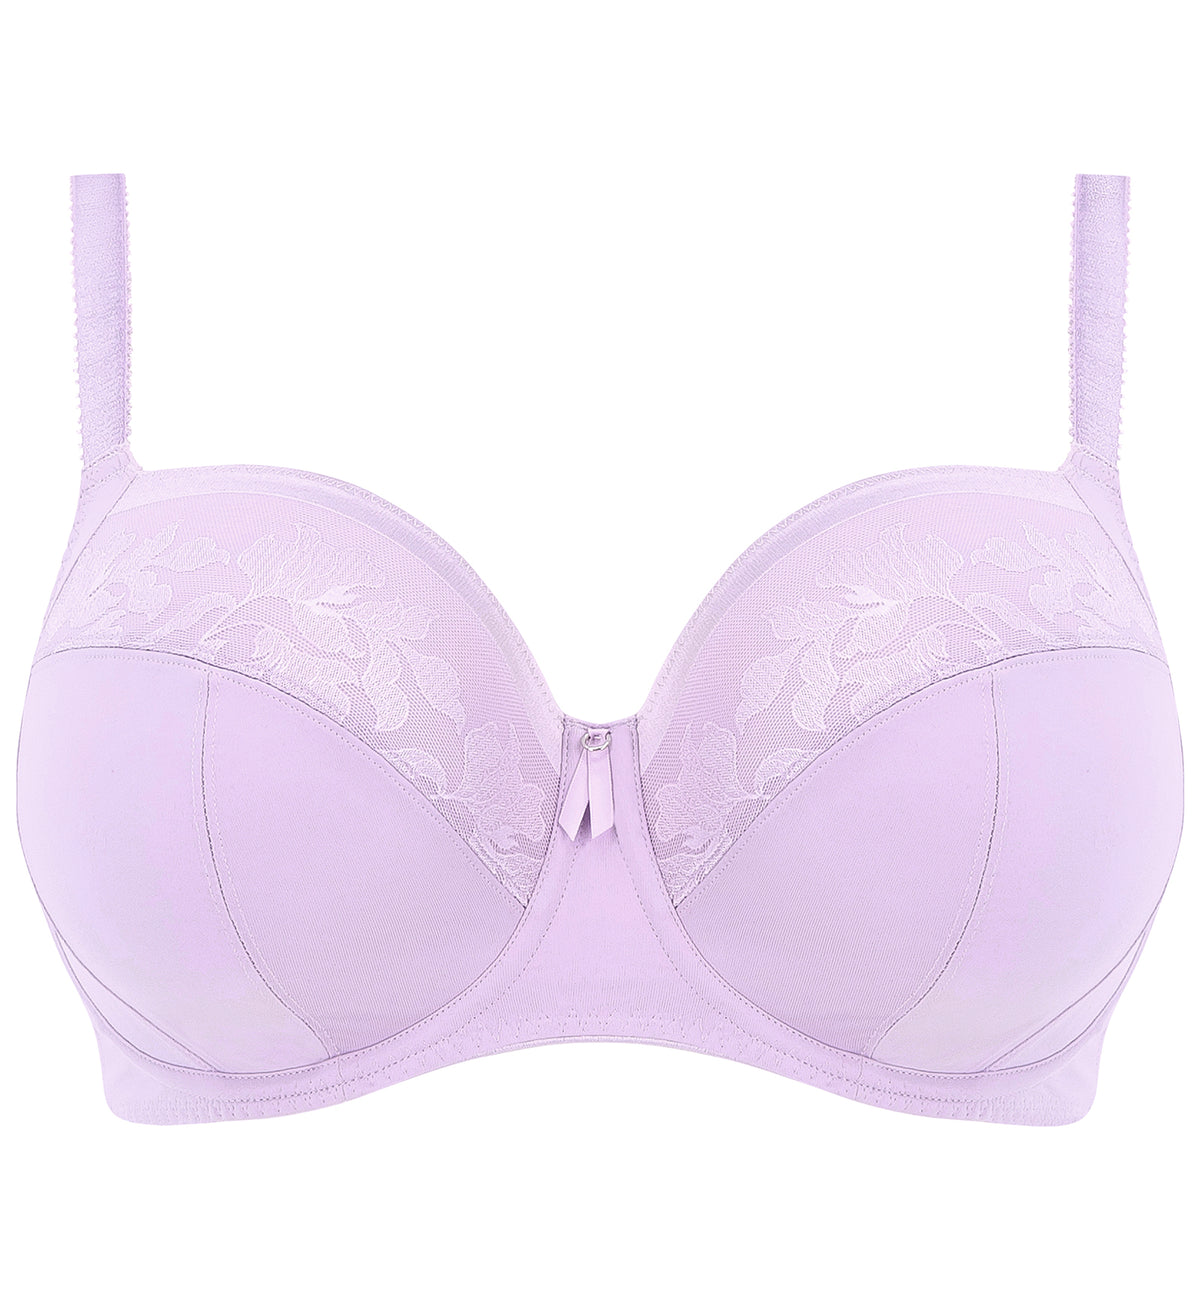 Fantasie Illusion Side Support Underwire Bra (2982),30F,Orchid - Orchid,30F